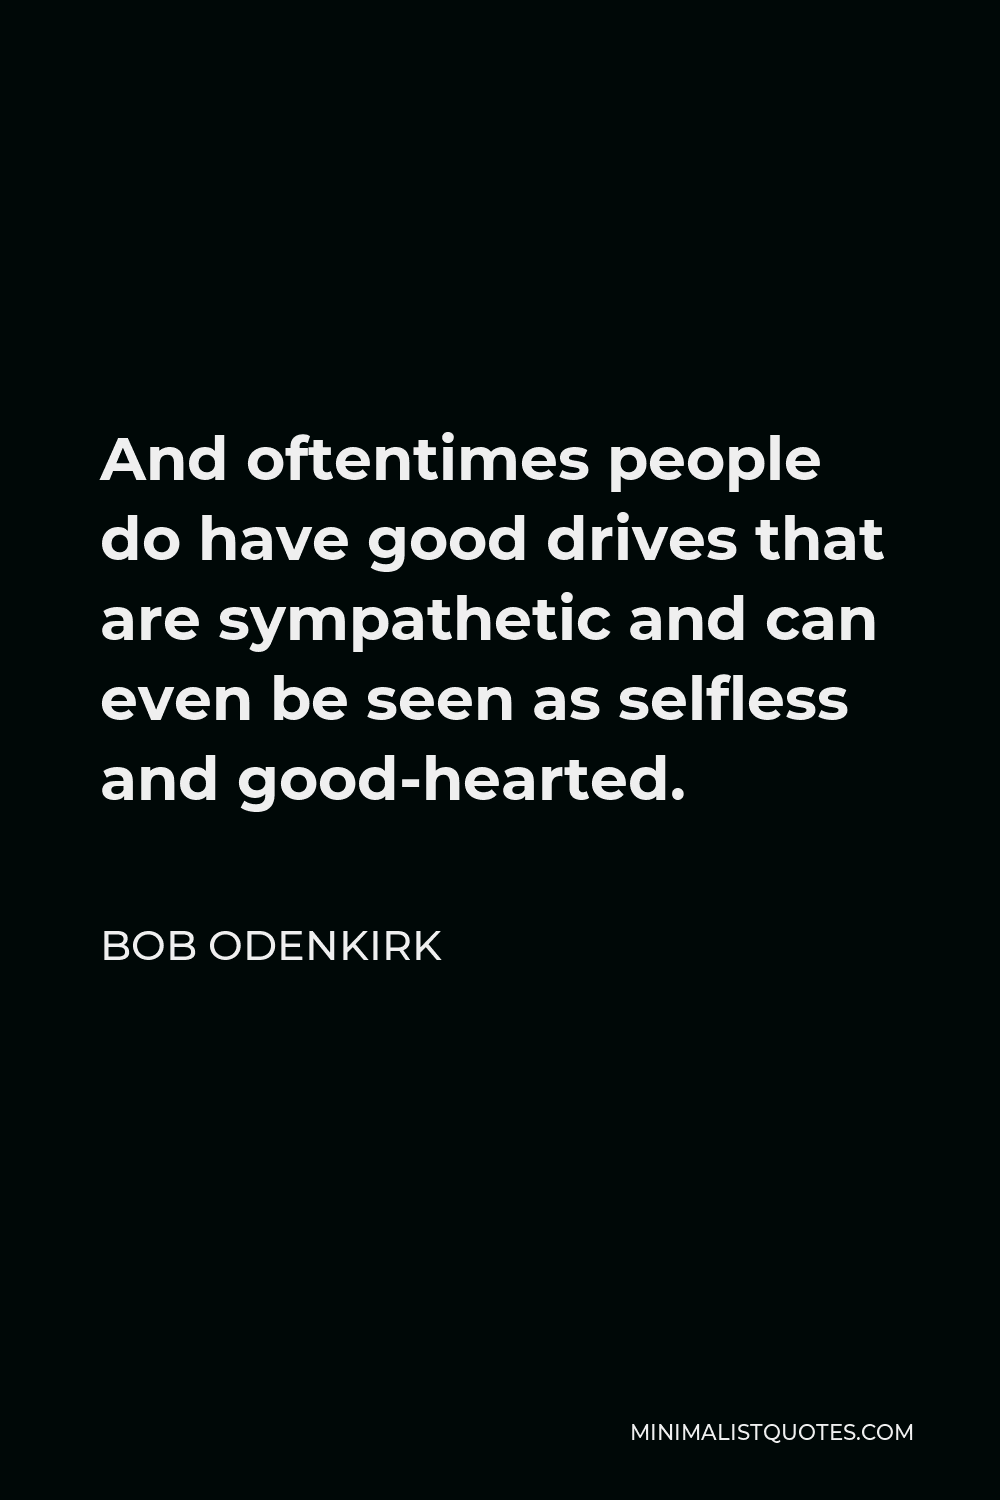 Bob Odenkirk Quote - And oftentimes people do have good drives that are sympathetic and can even be seen as selfless and good-hearted.